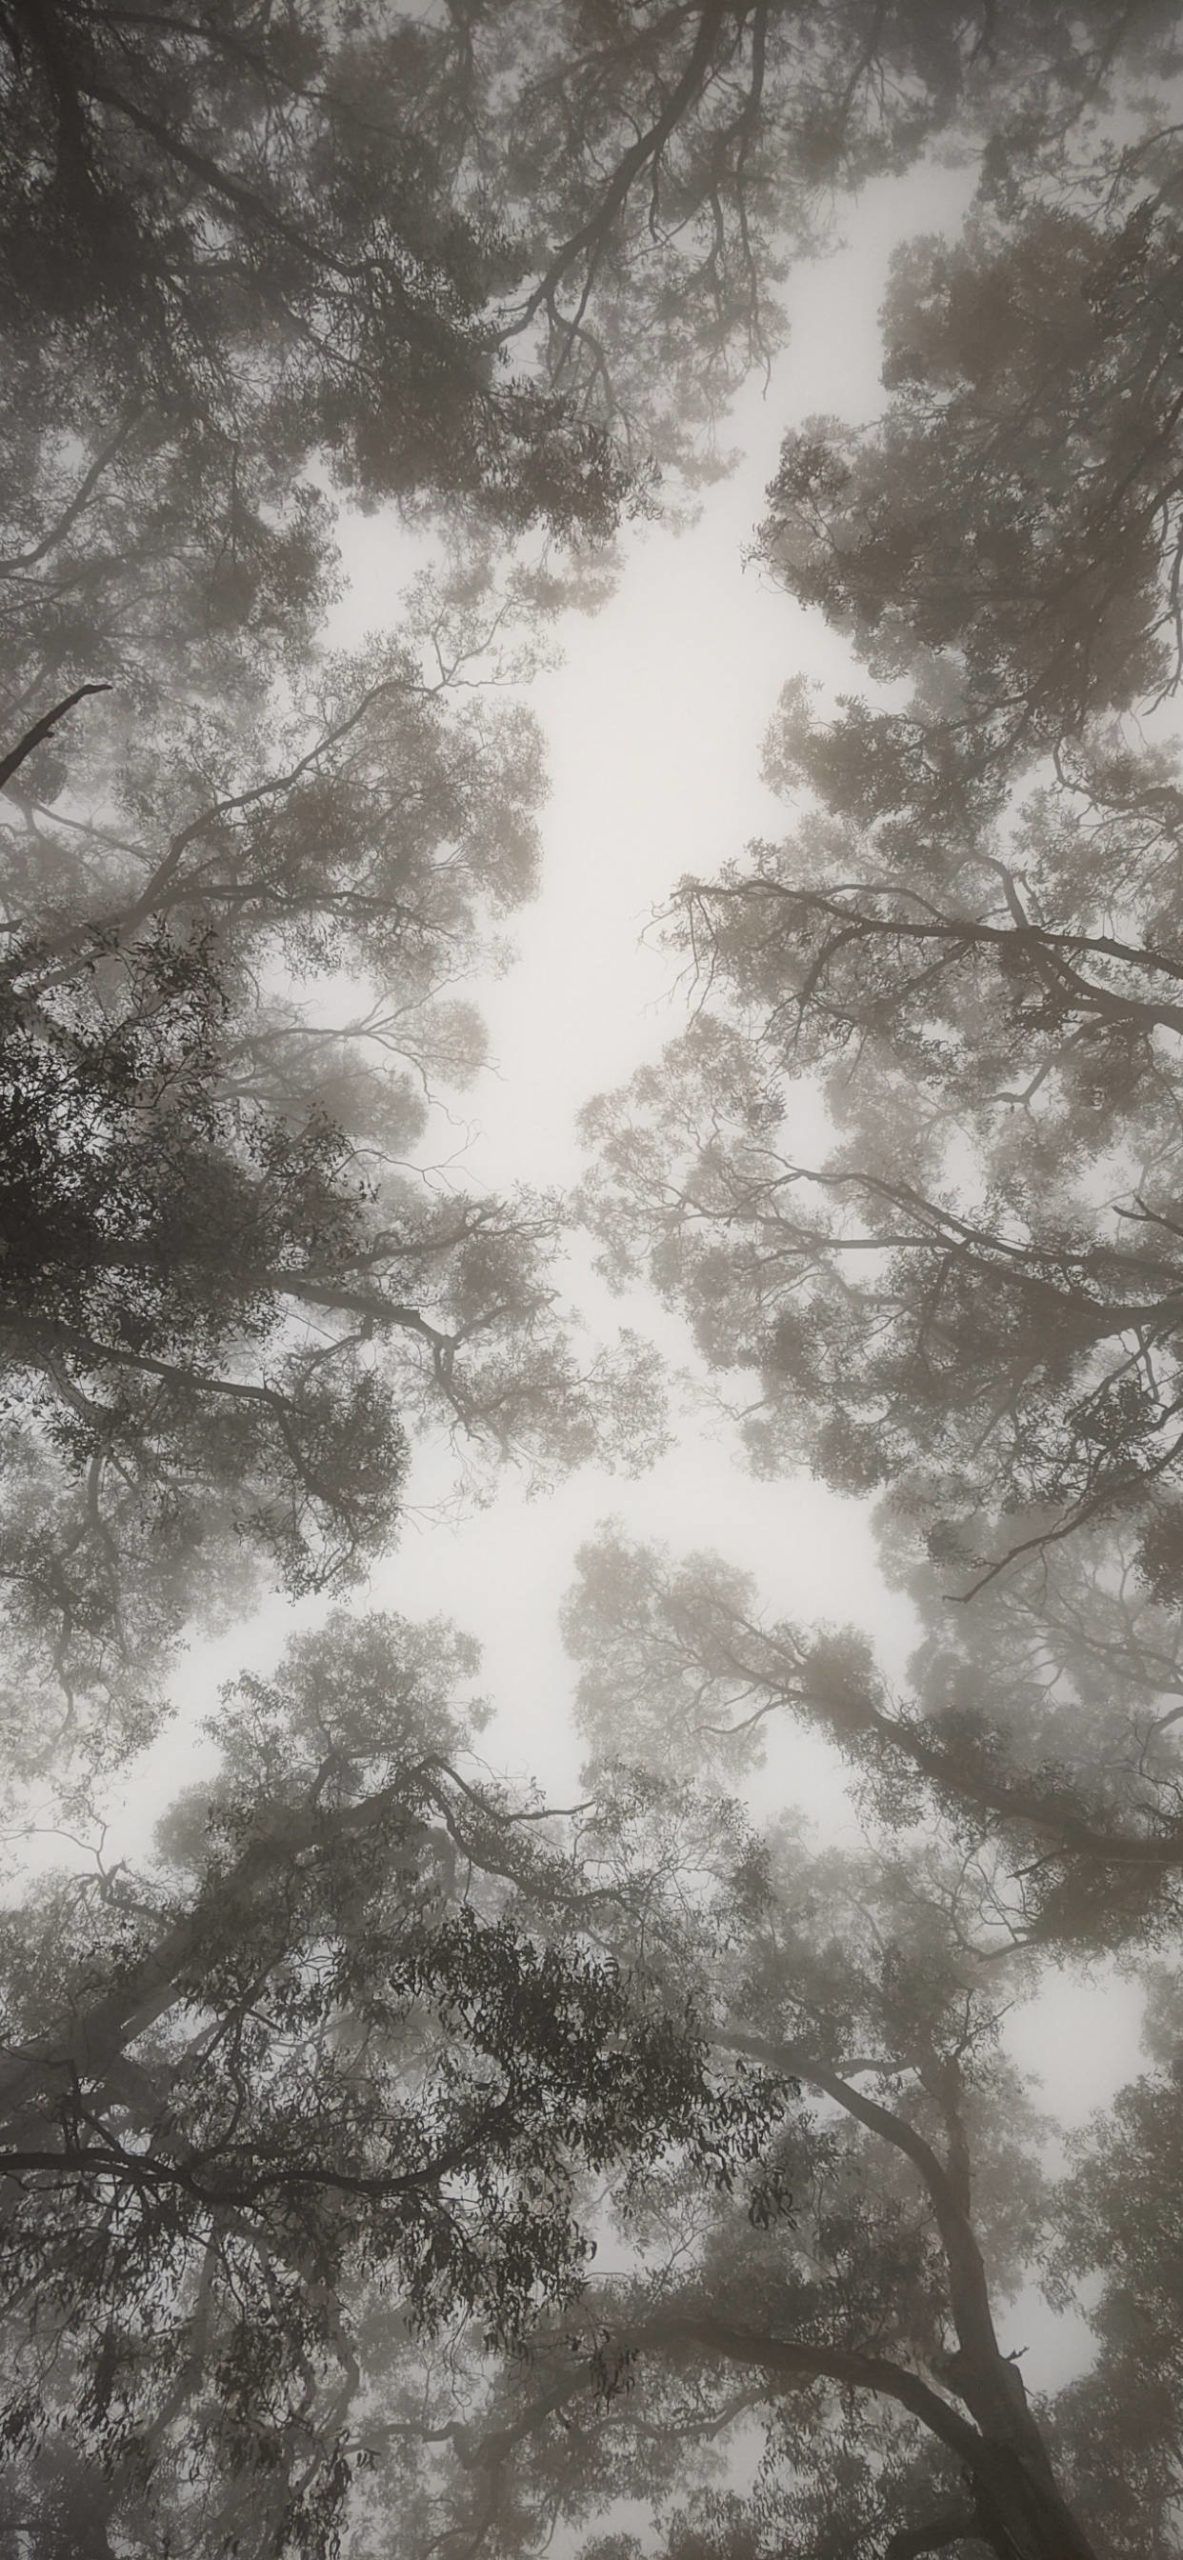 A view of the sky through the branches of trees in the mist. - Fog